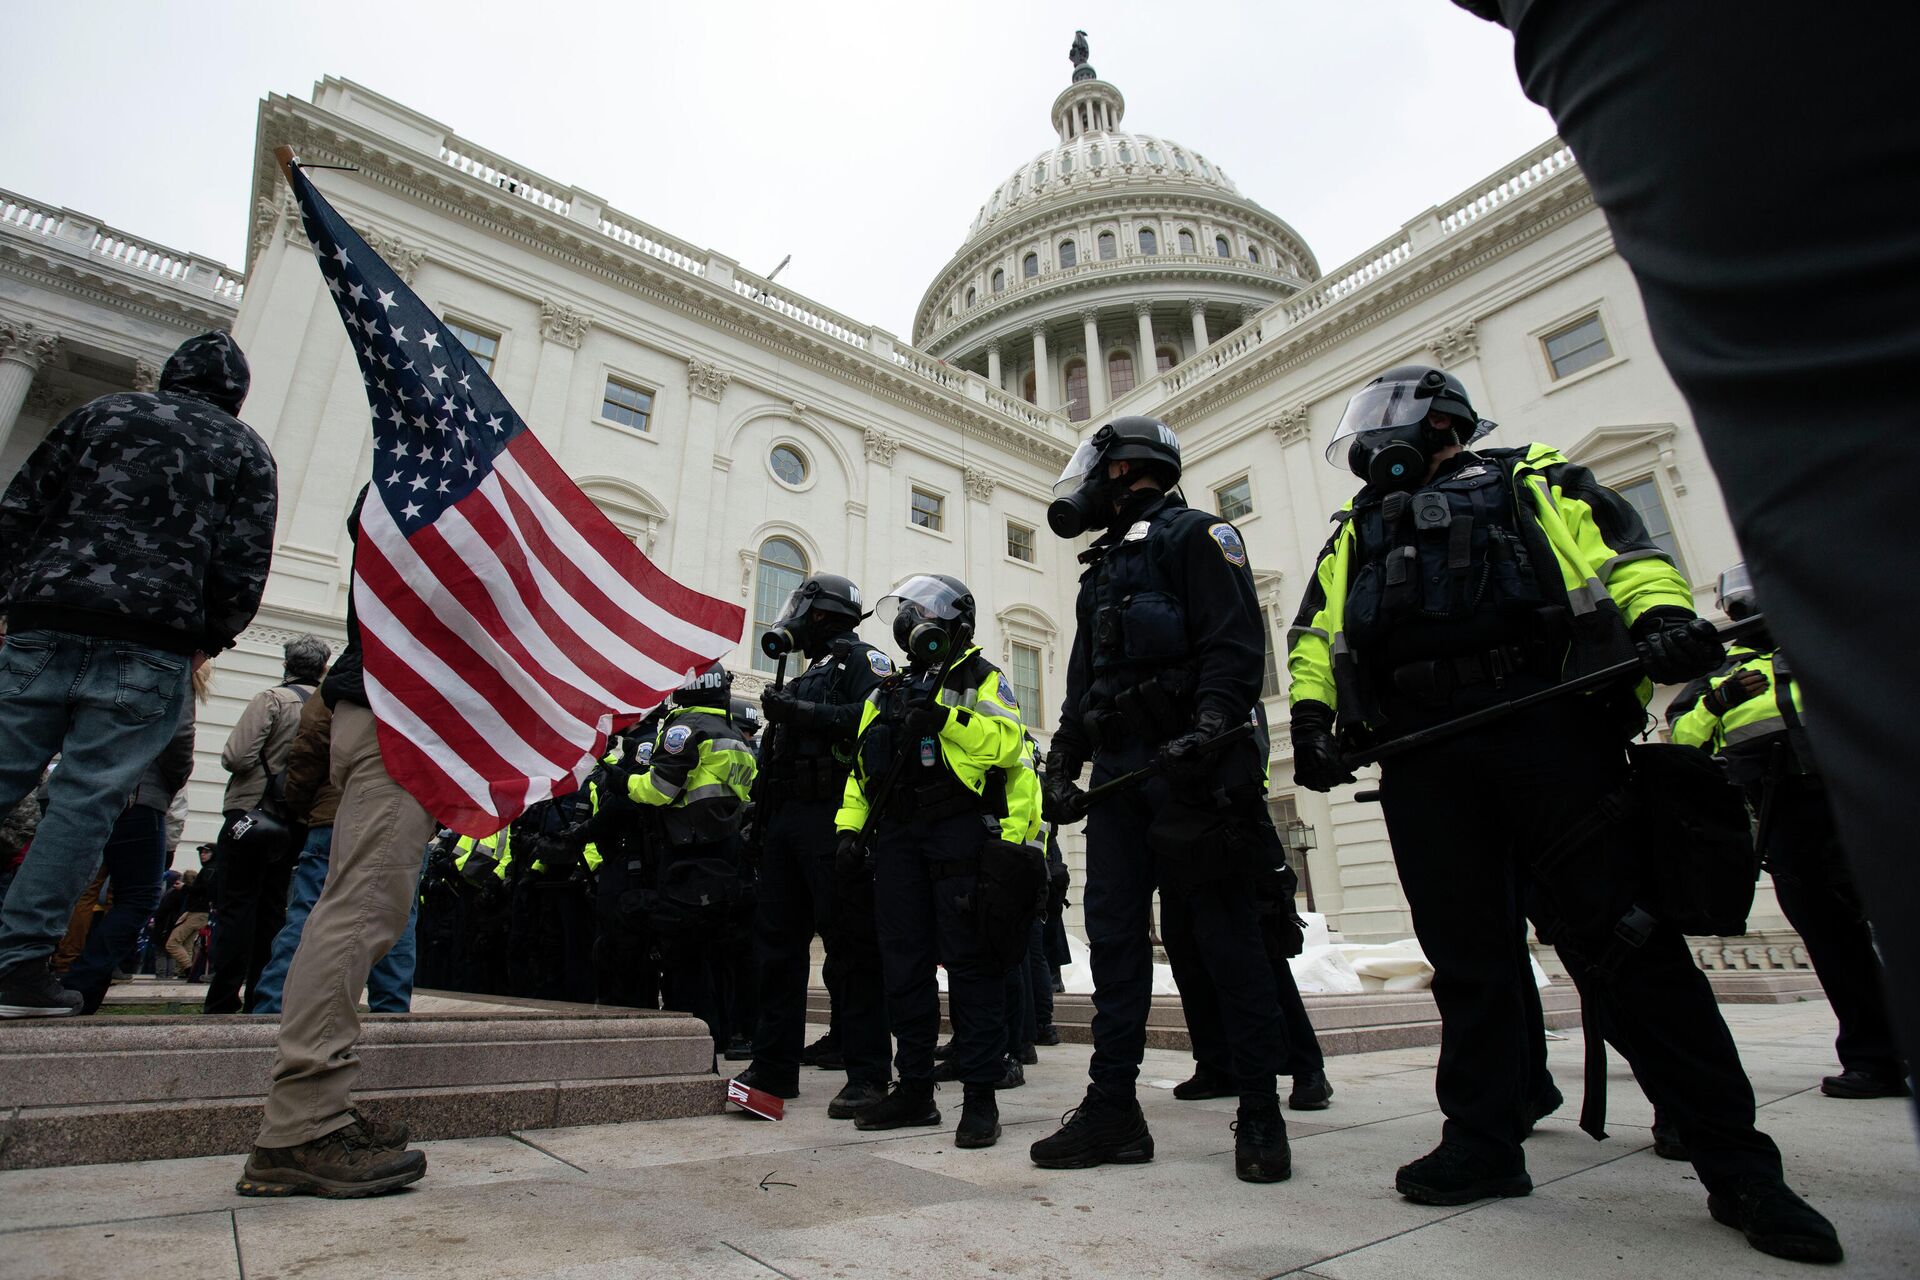 U.S. Capitol Police officers push back rioters who were trying to break into the U.S. Capitol on Jan. 6, 2021, in Washington. - Sputnik International, 1920, 15.11.2021